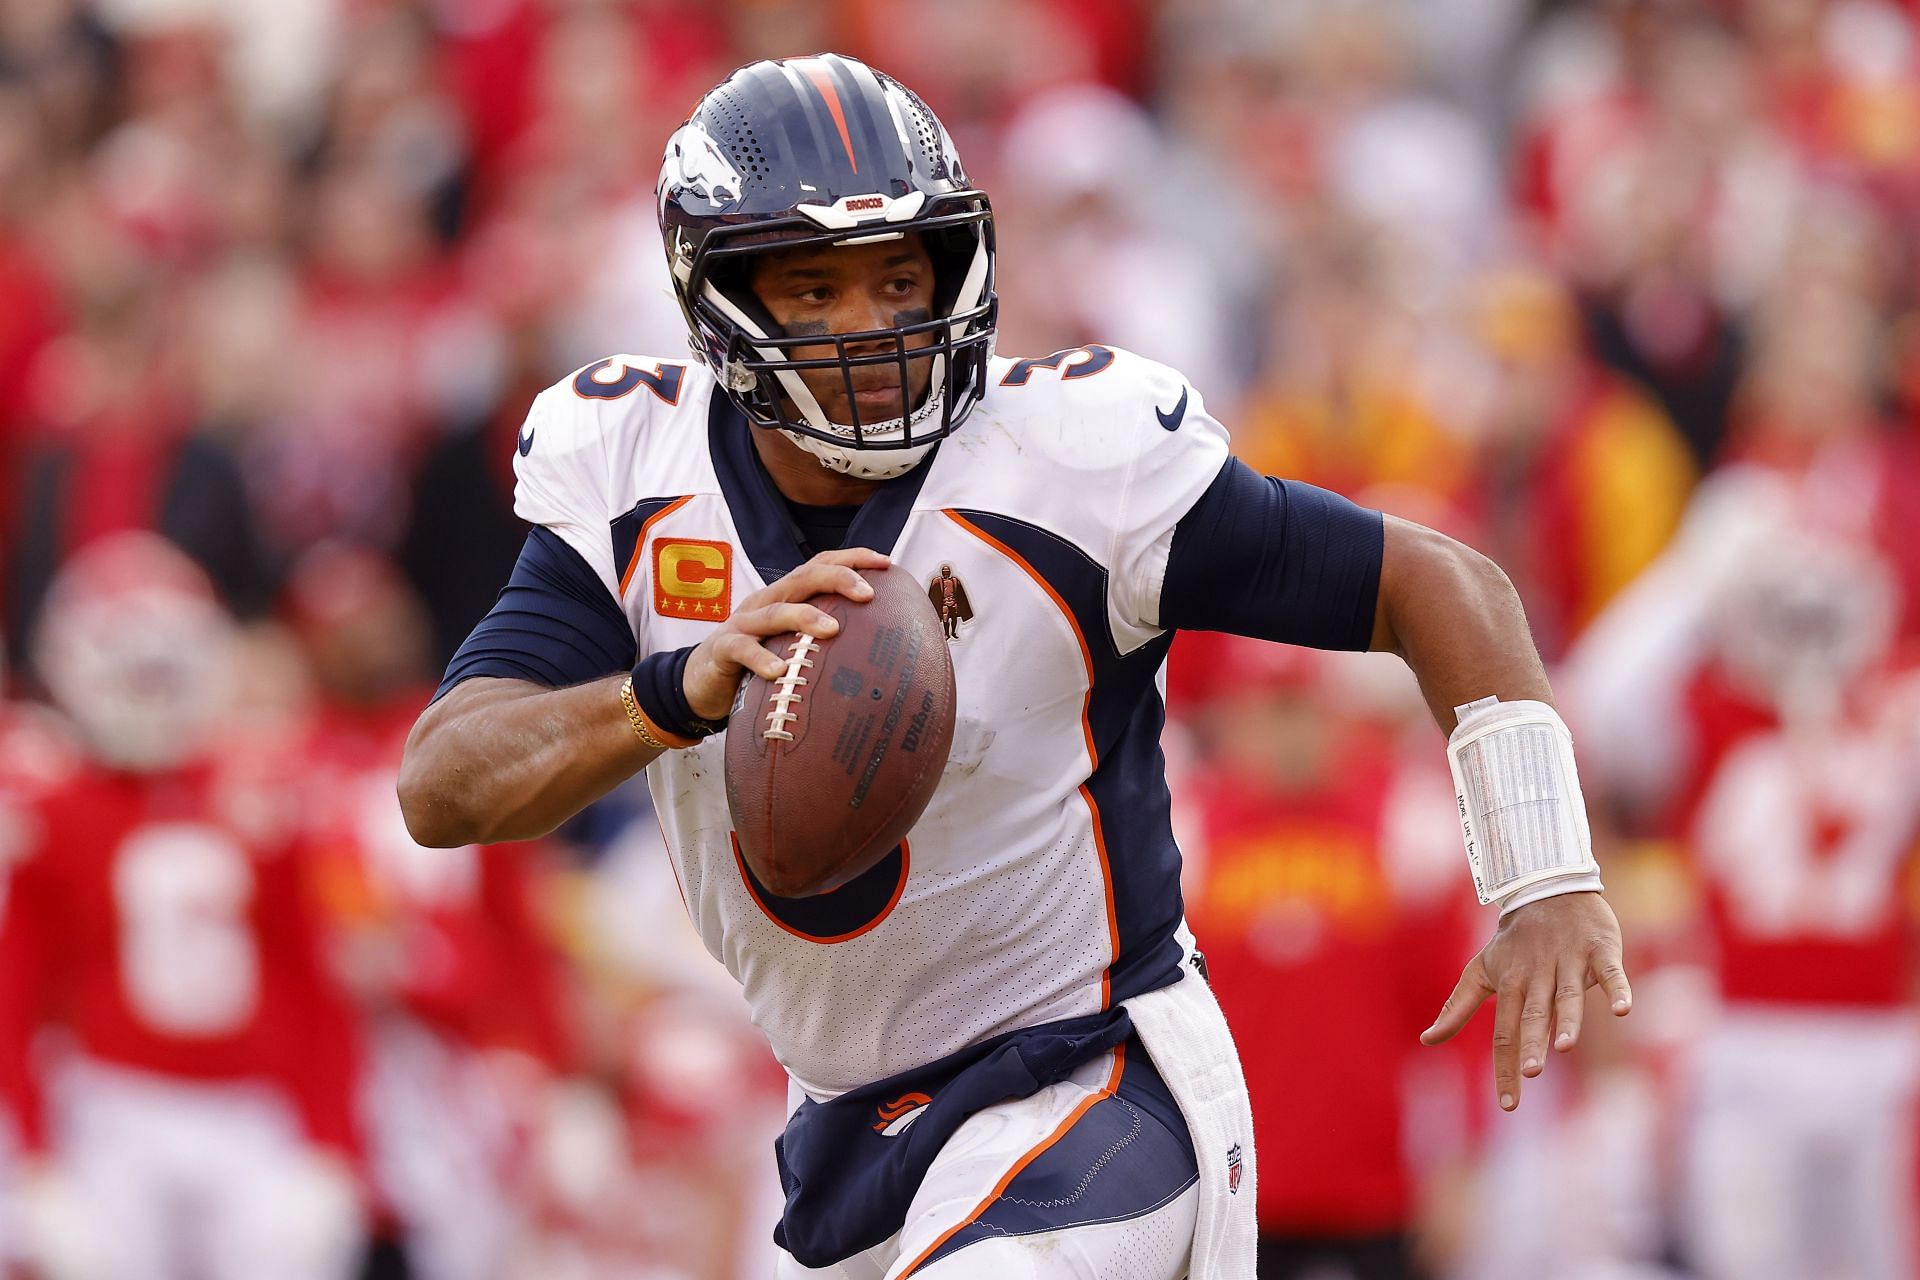 NFL - Russell Wilson of the Denver Broncos